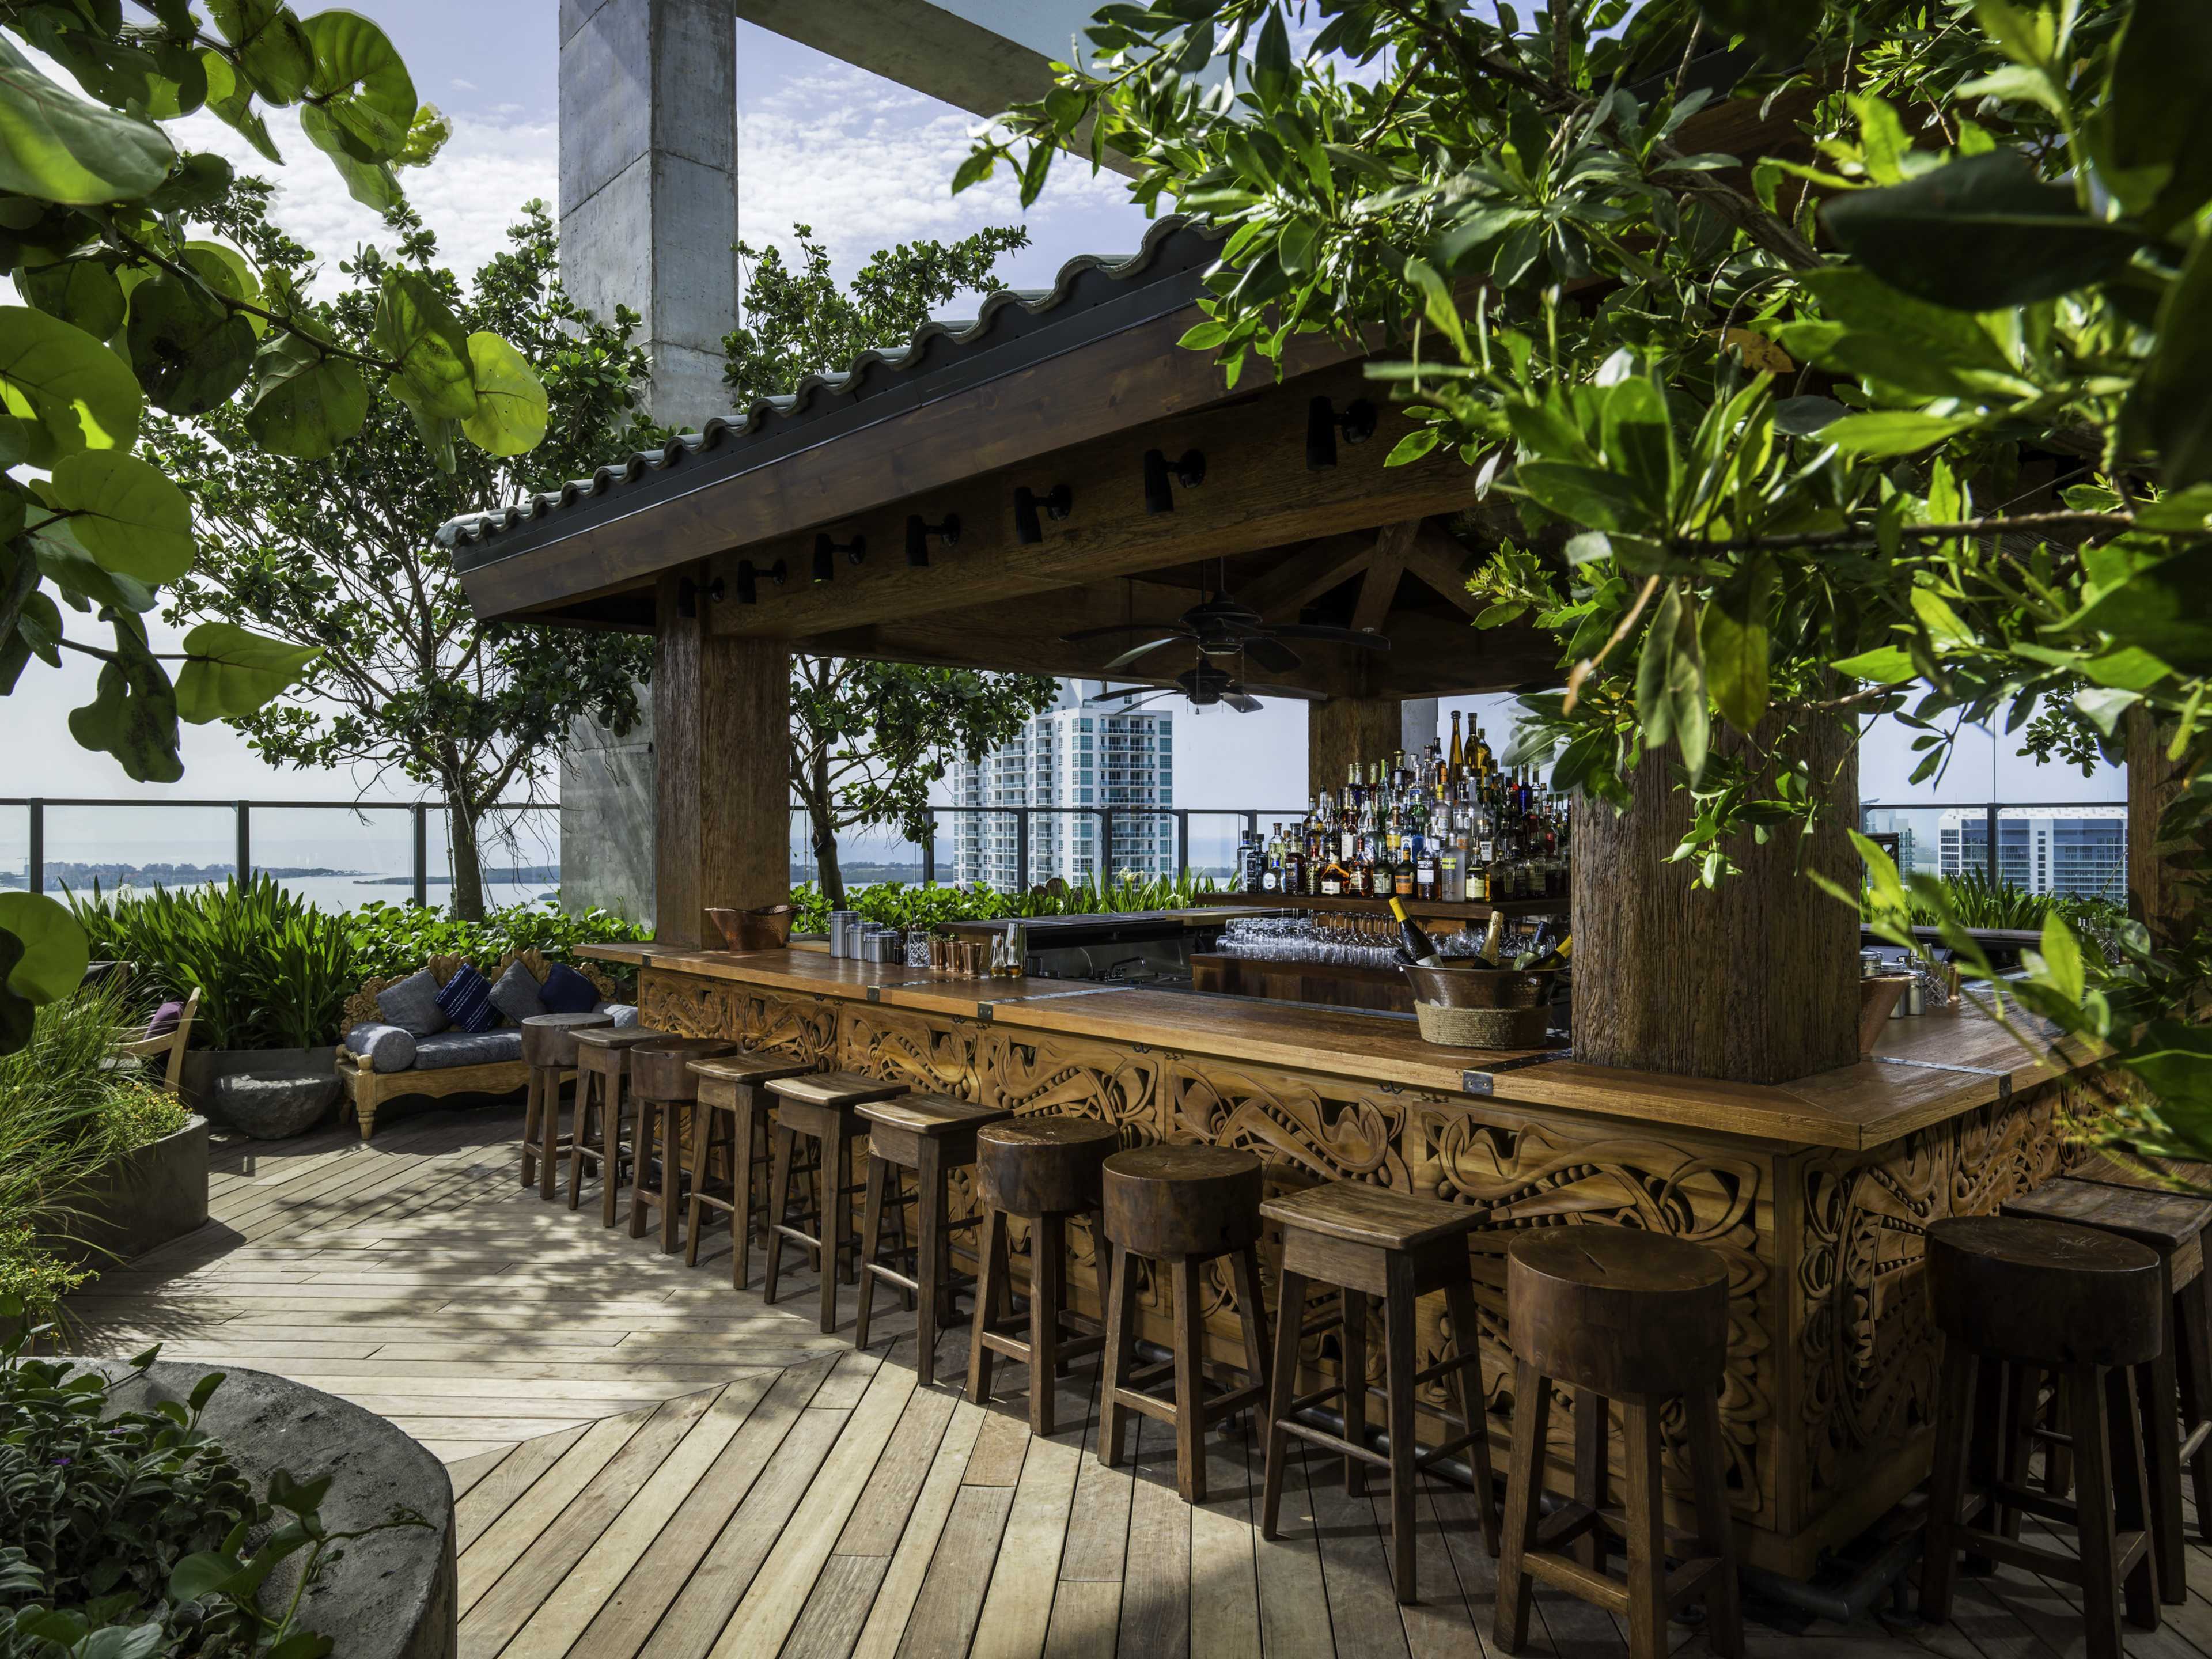 rooftop bar filled with trees and plants and a wooden bar area